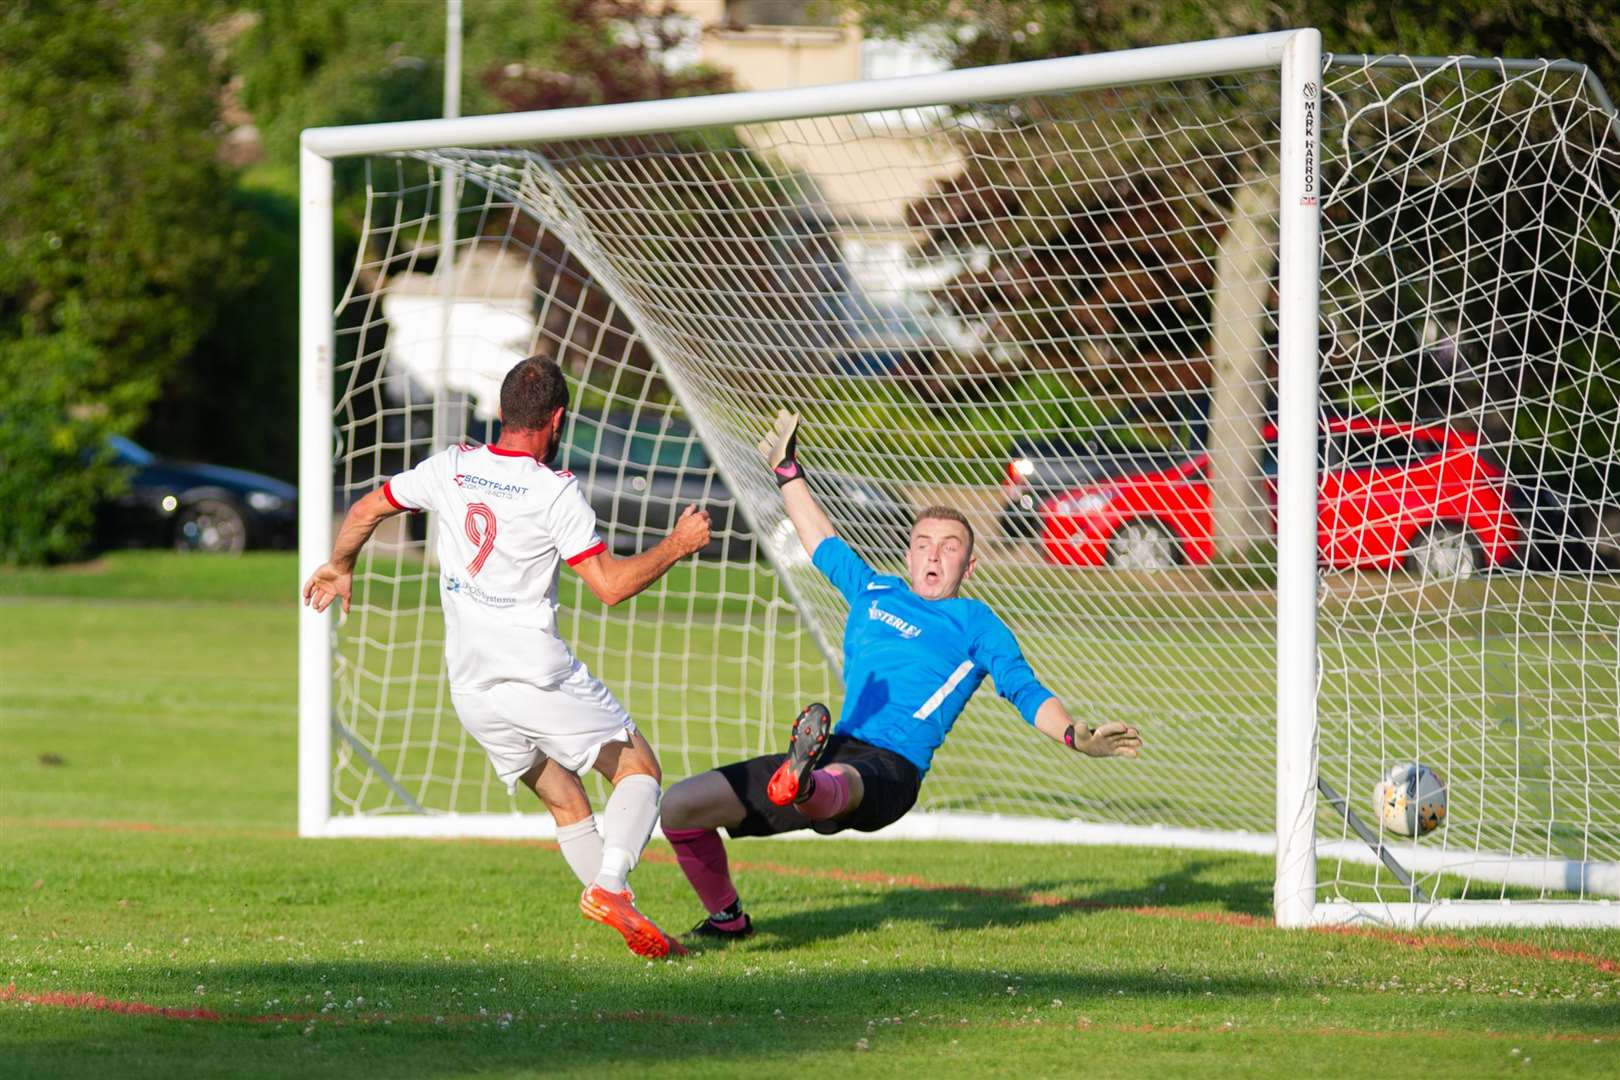 Carisbrooke's Ricky Wardrop scores the only goal of the match past Westerlea's Kyle Mallinson...Carisbrooke FC (1) vs Westerlea FC (0) - Top Car Cup Final - Roysvale, Forres 16/07/2021...Picture: Daniel Forsyth..